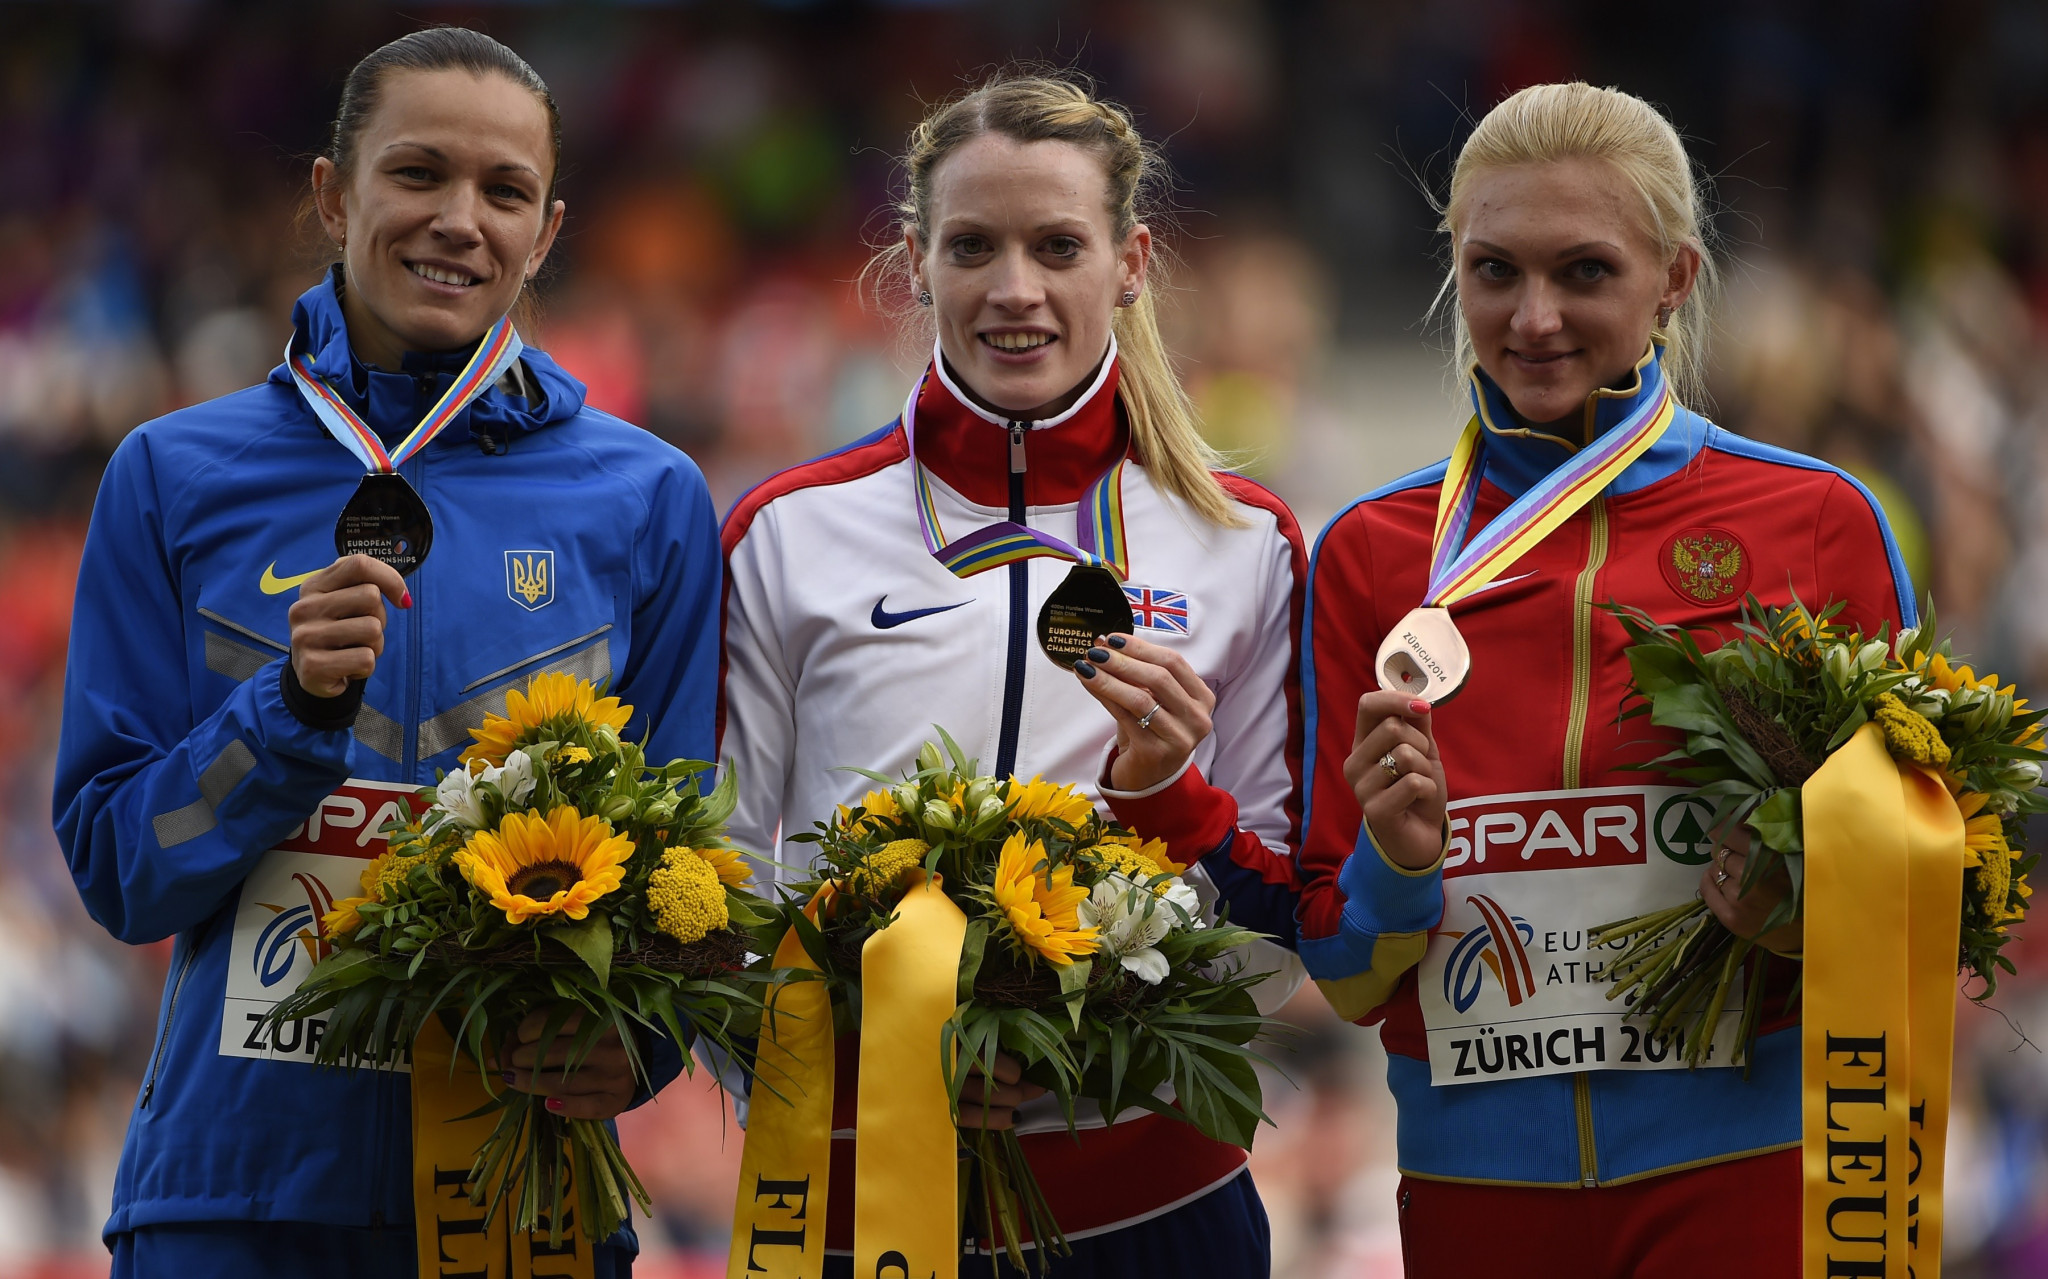 Irina Davydova, right, will also lose the bronze medal she won at the 2014 European Championships in Zurich ©Getty Images